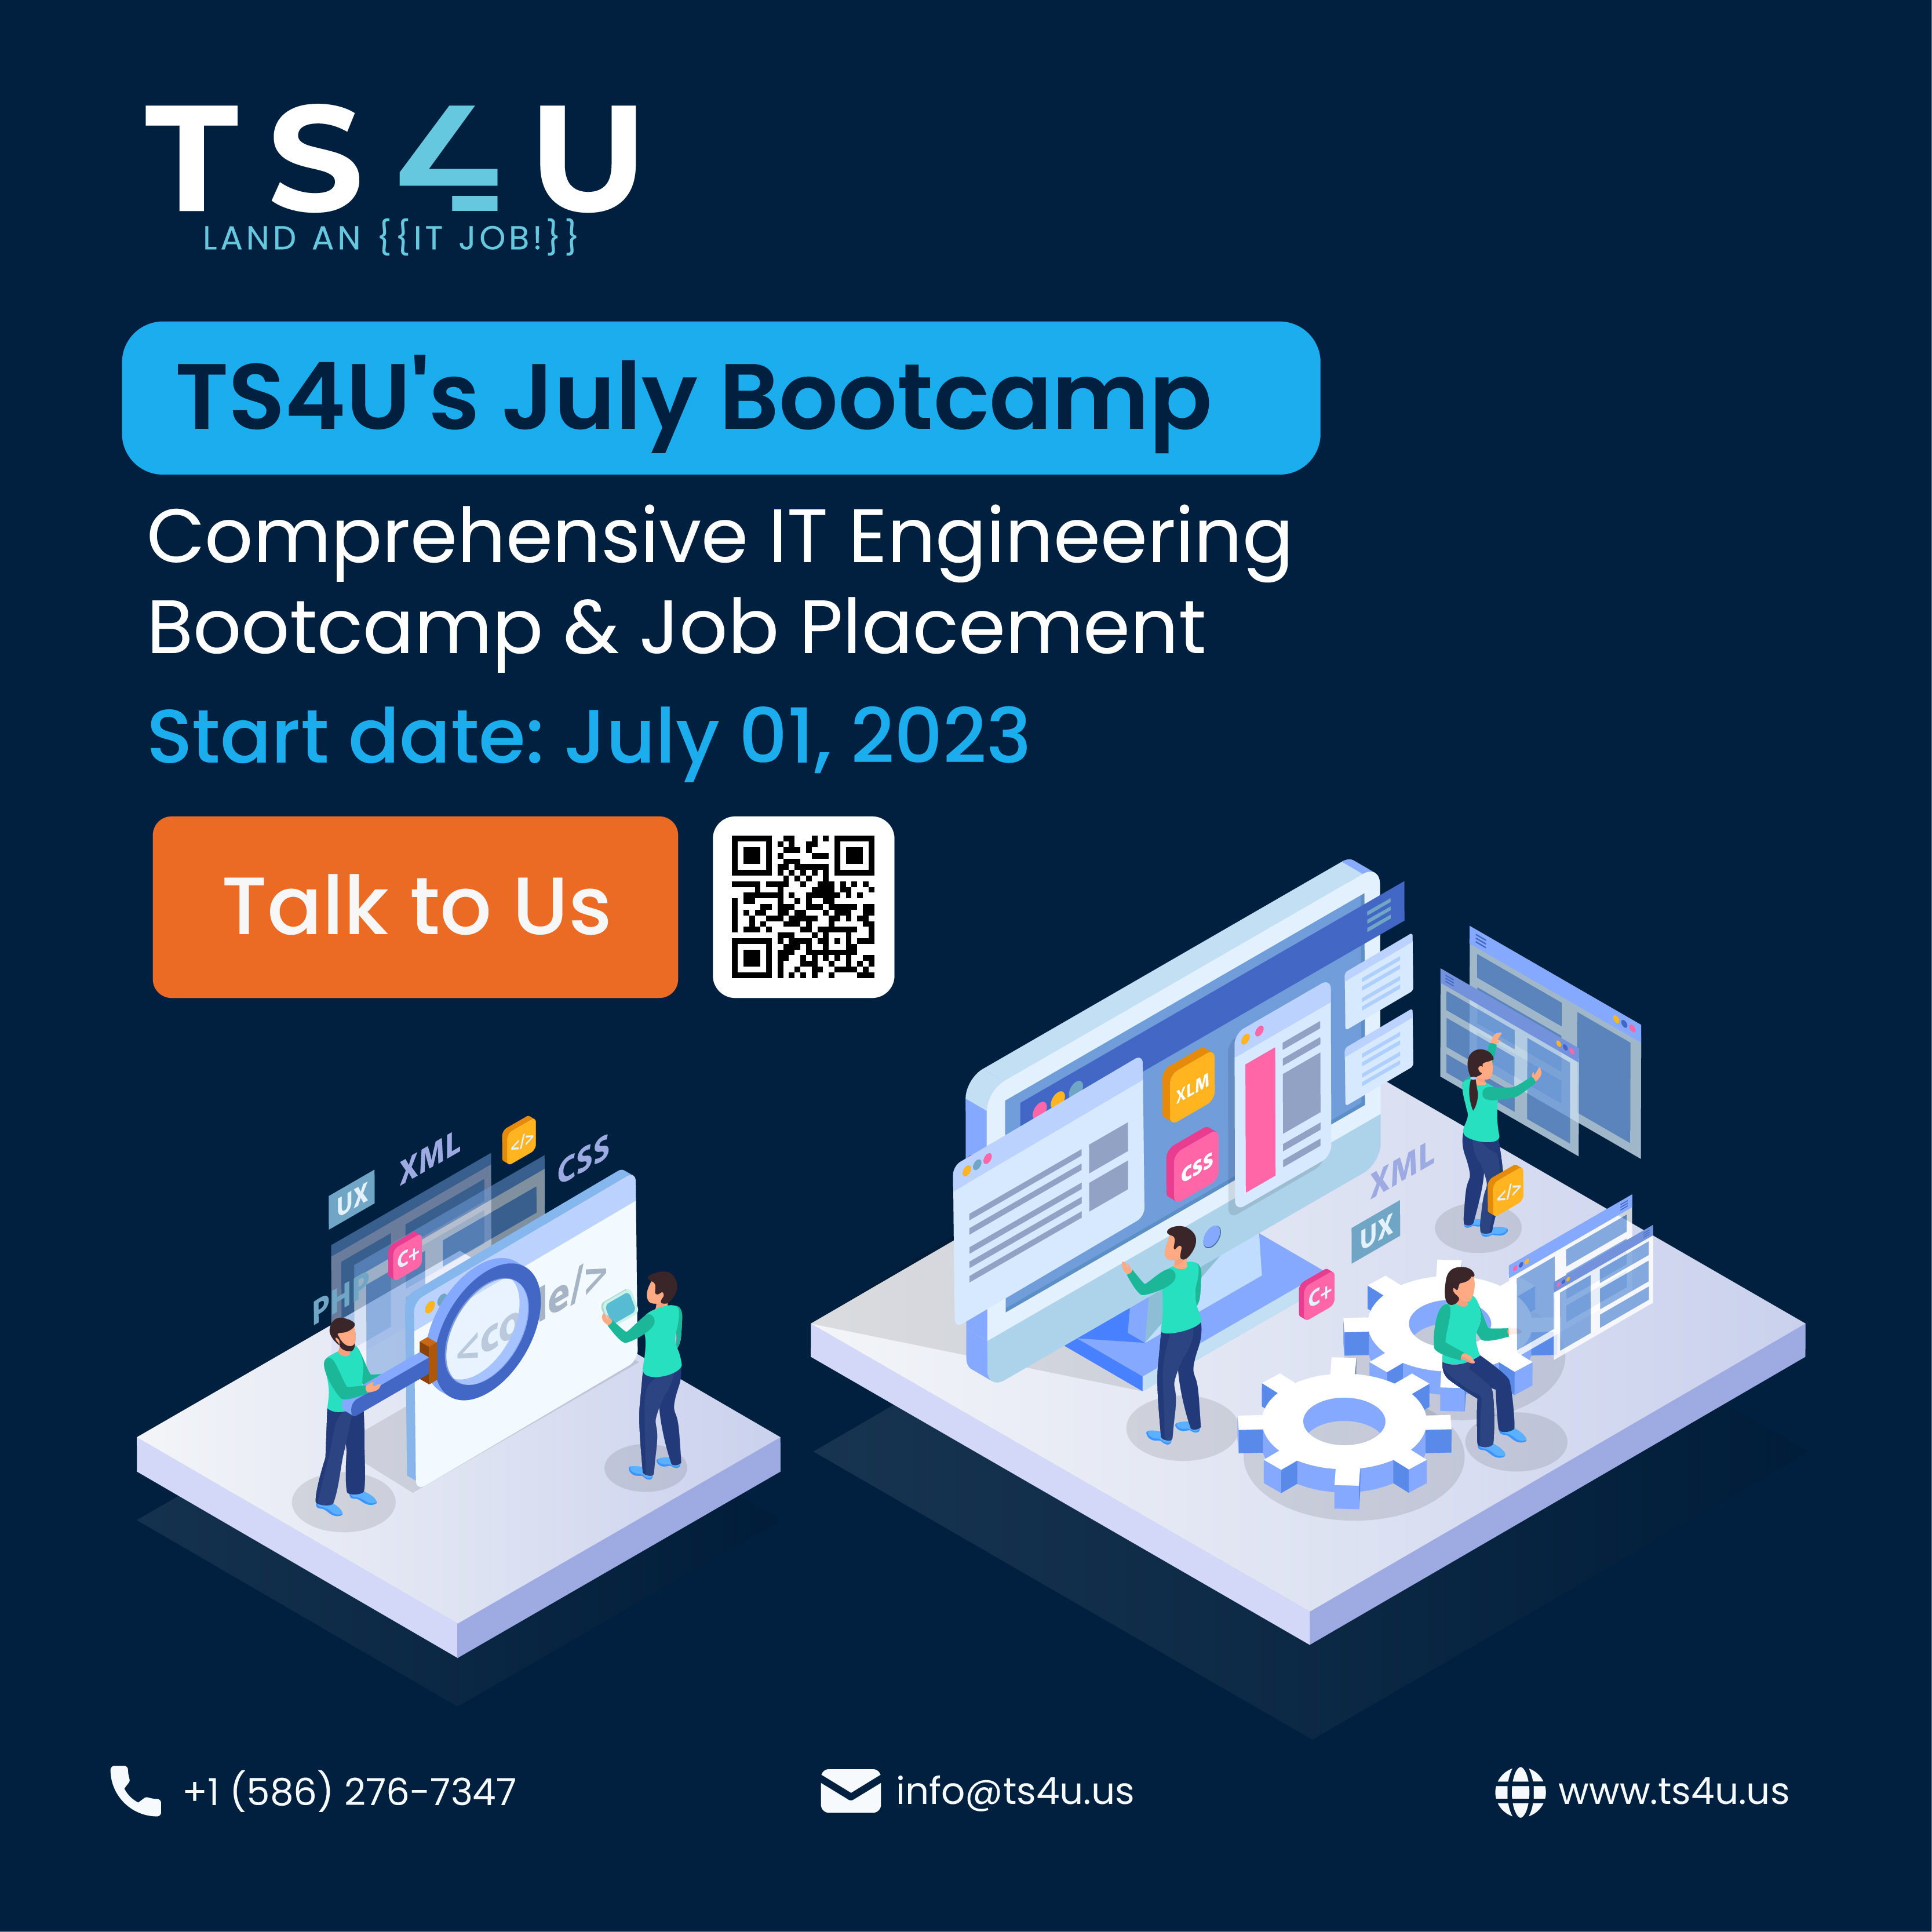 TS4U's July Bootcamp: Comprehensive IT Engineering Bootcamp & Job Placement